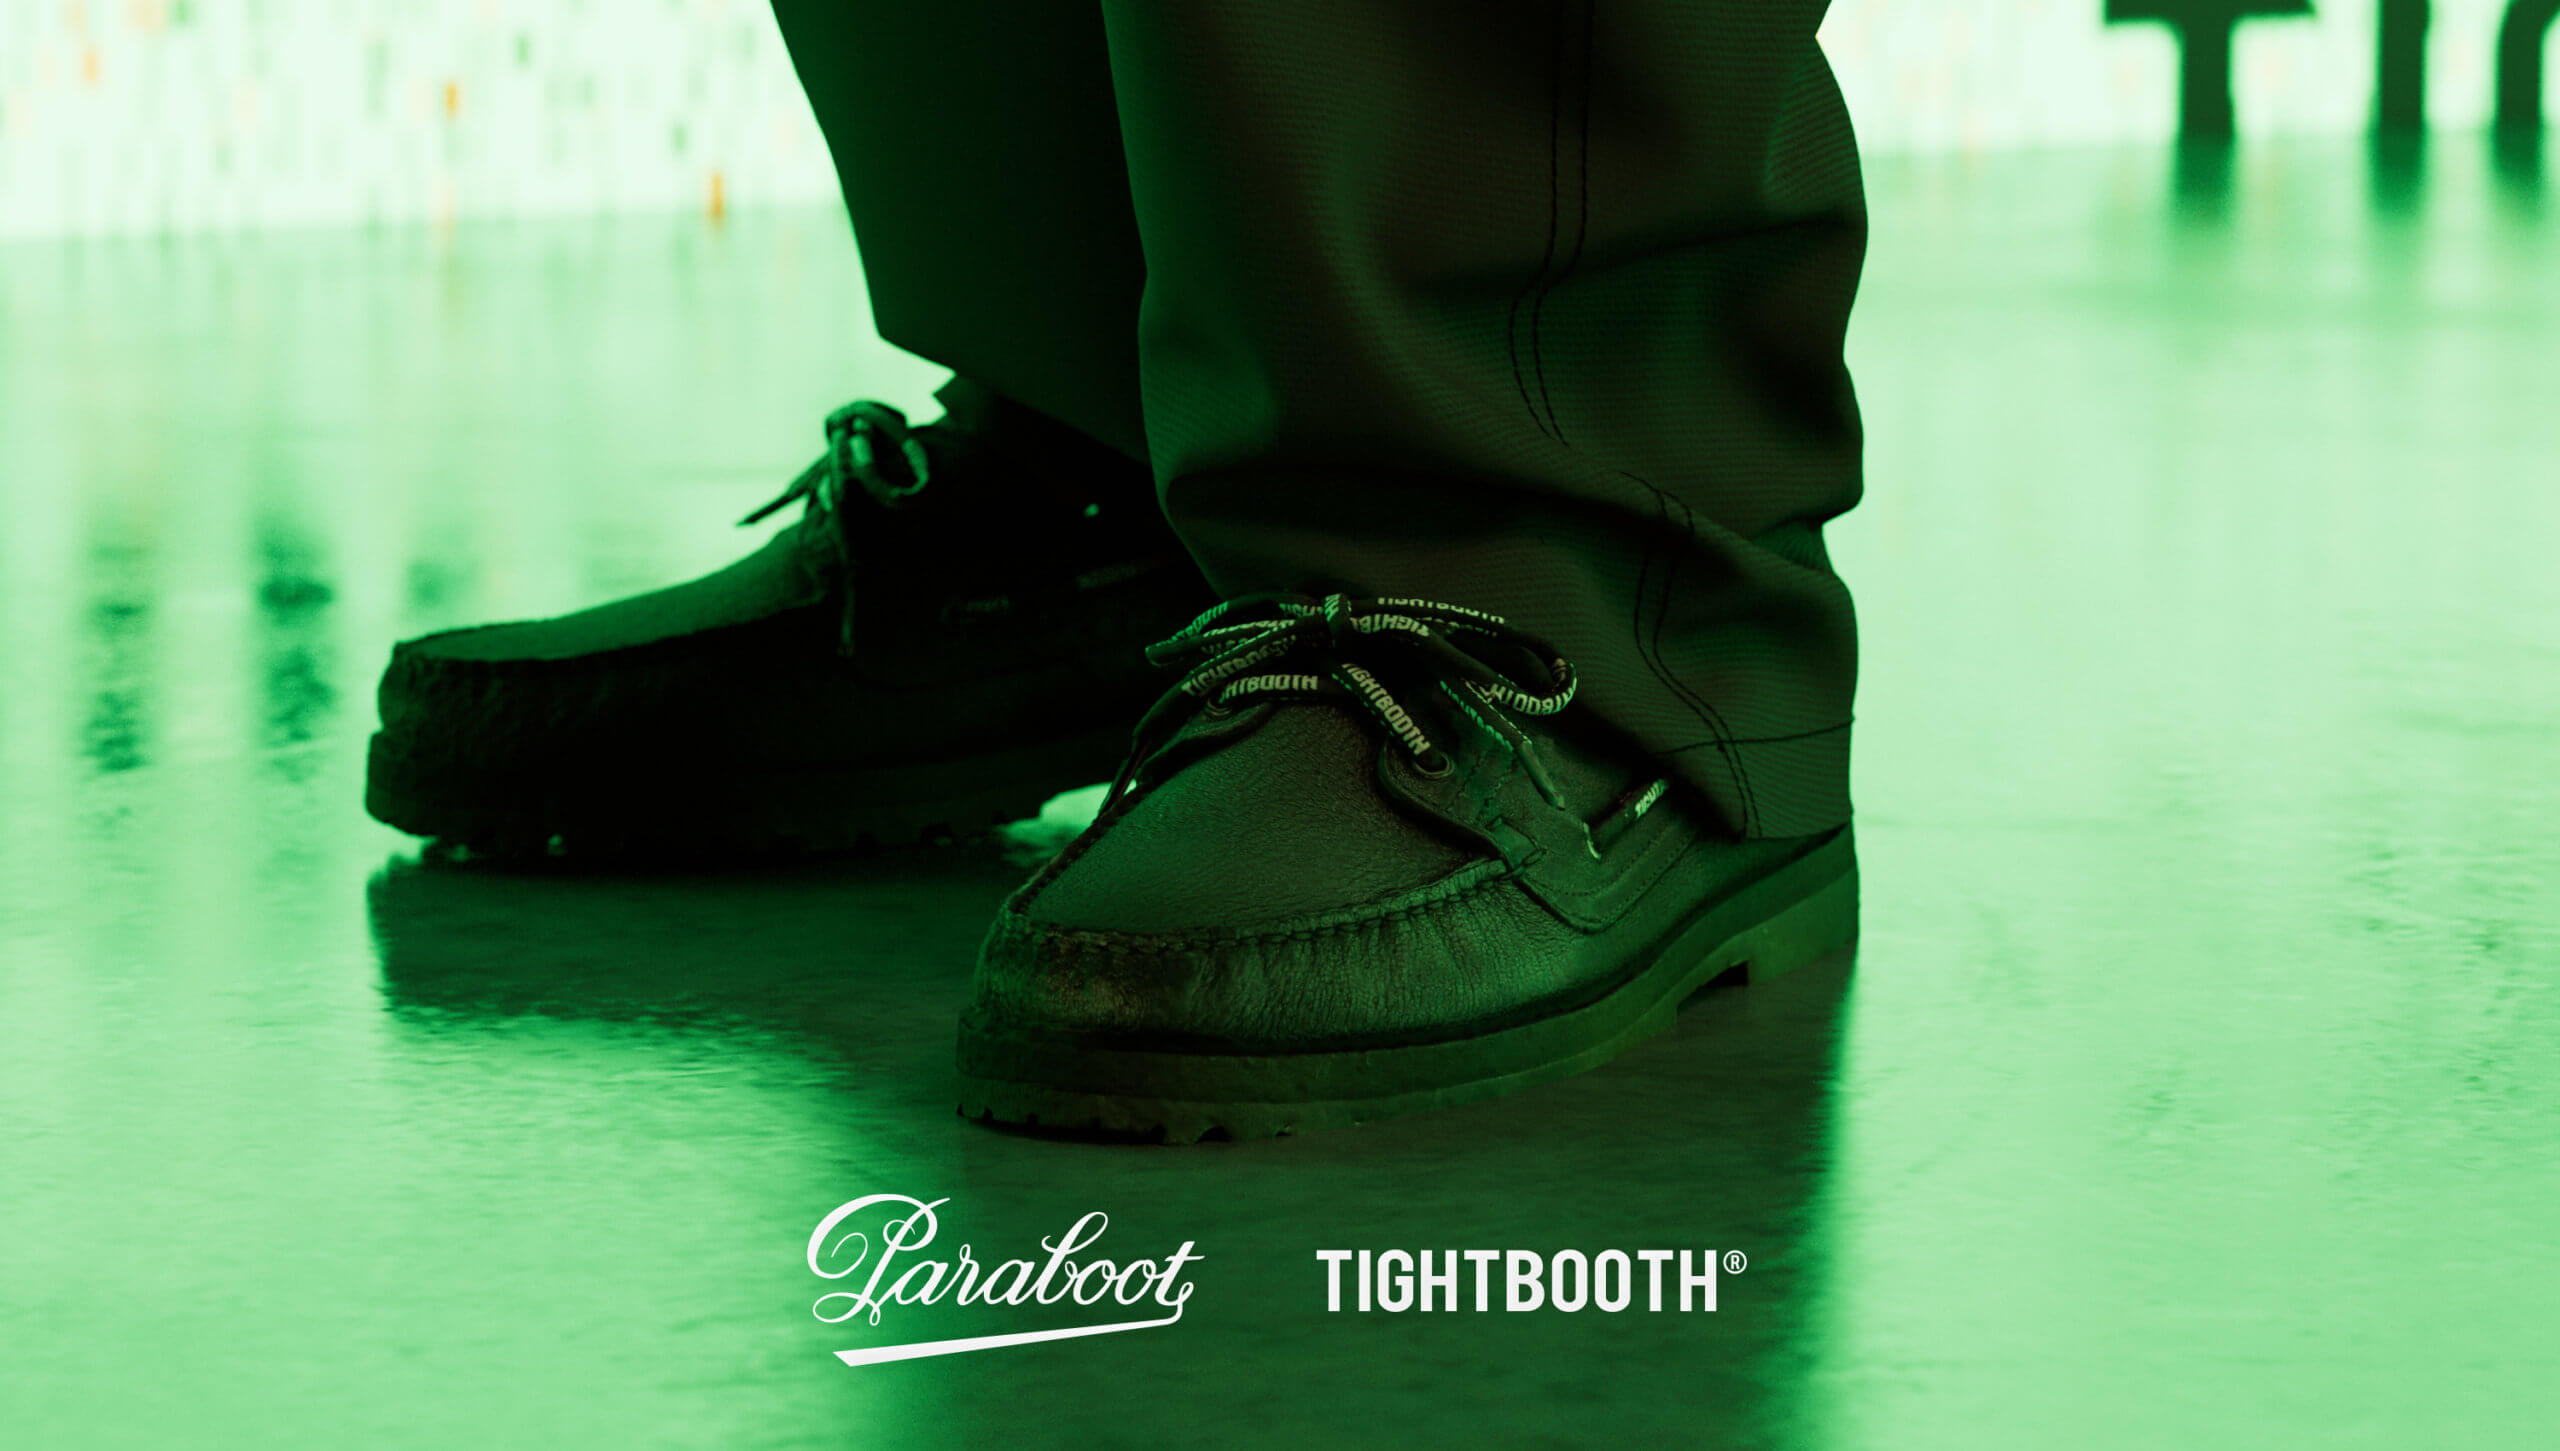 TIGHTBOOTH x Paraboot
